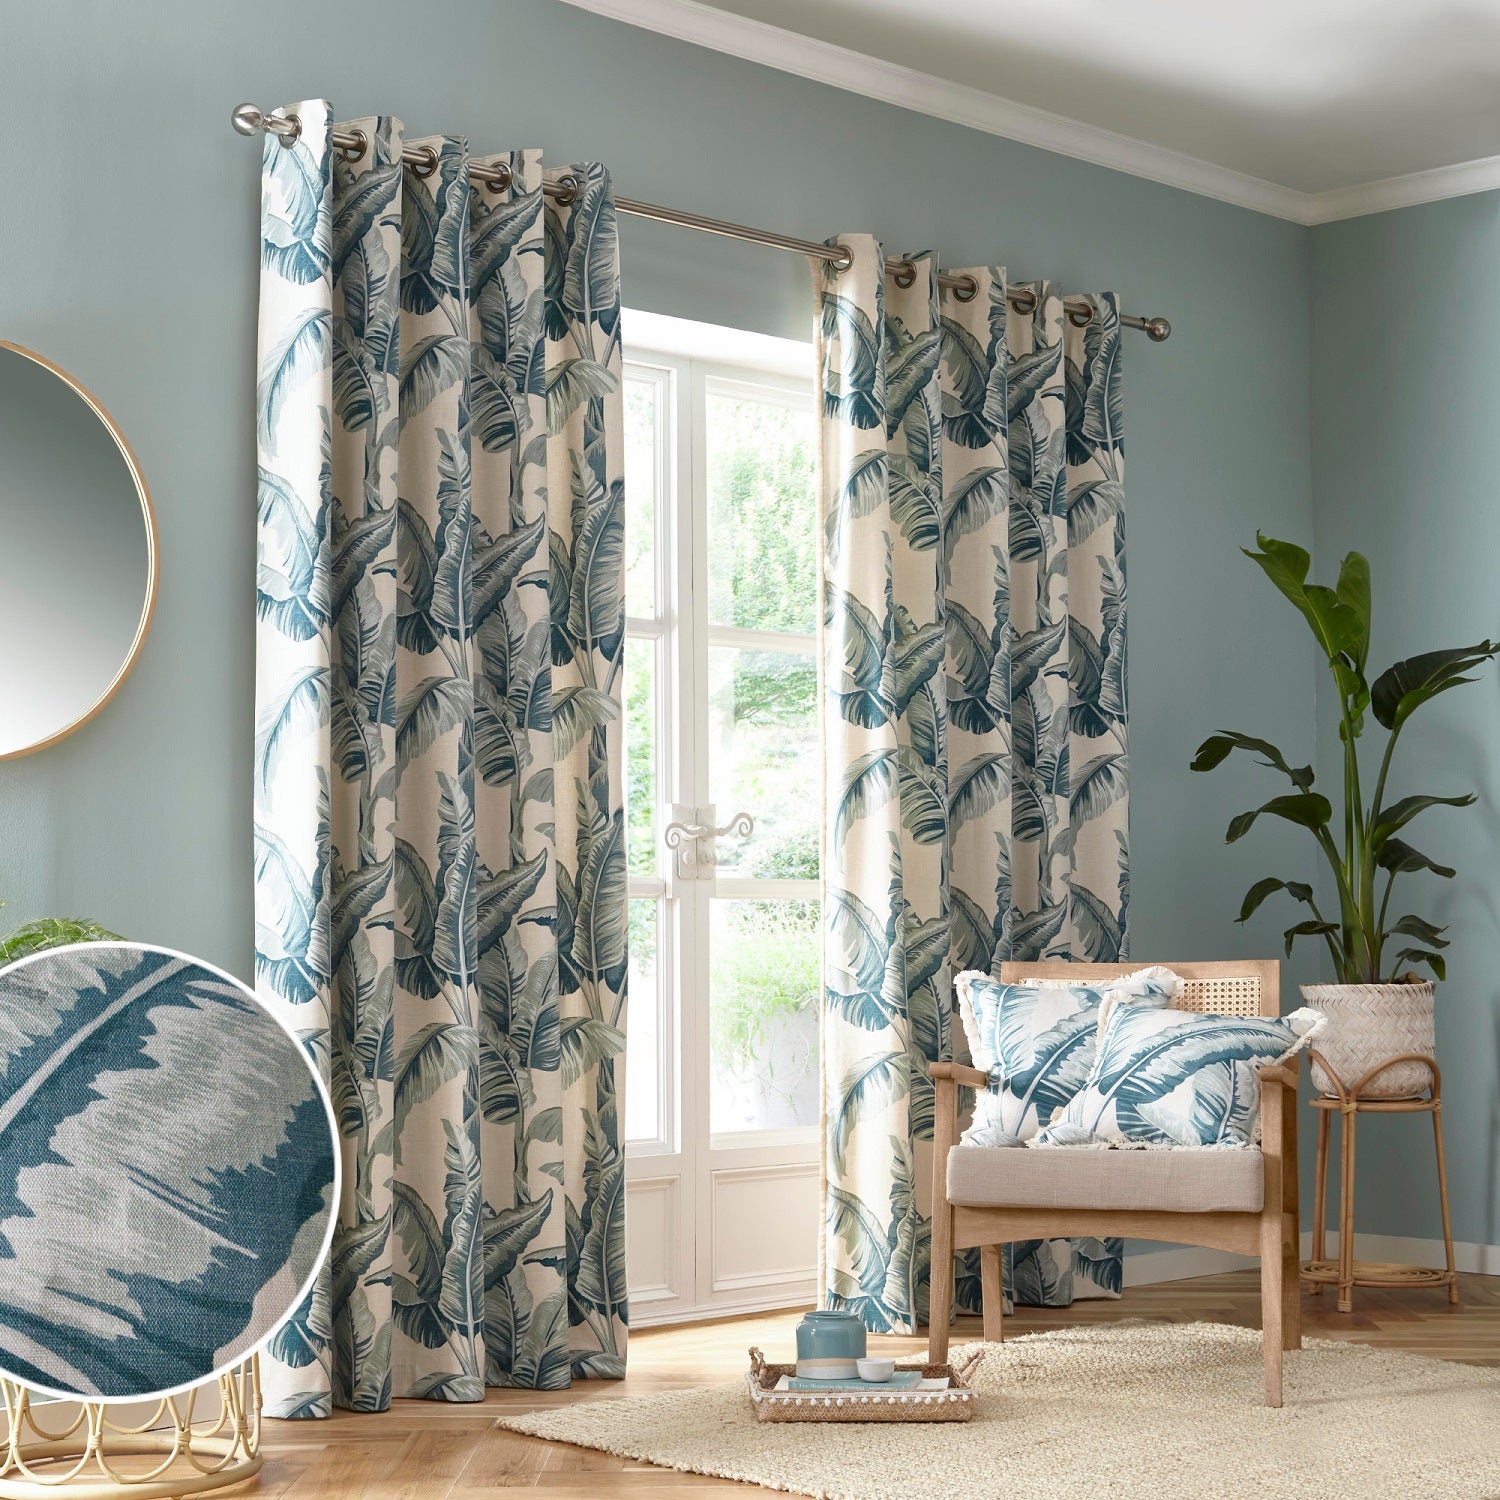 Tropical Jungle Palm Leaves Eyelet Ring Top Curtains 66" x 90" - Cadiz Teal Green